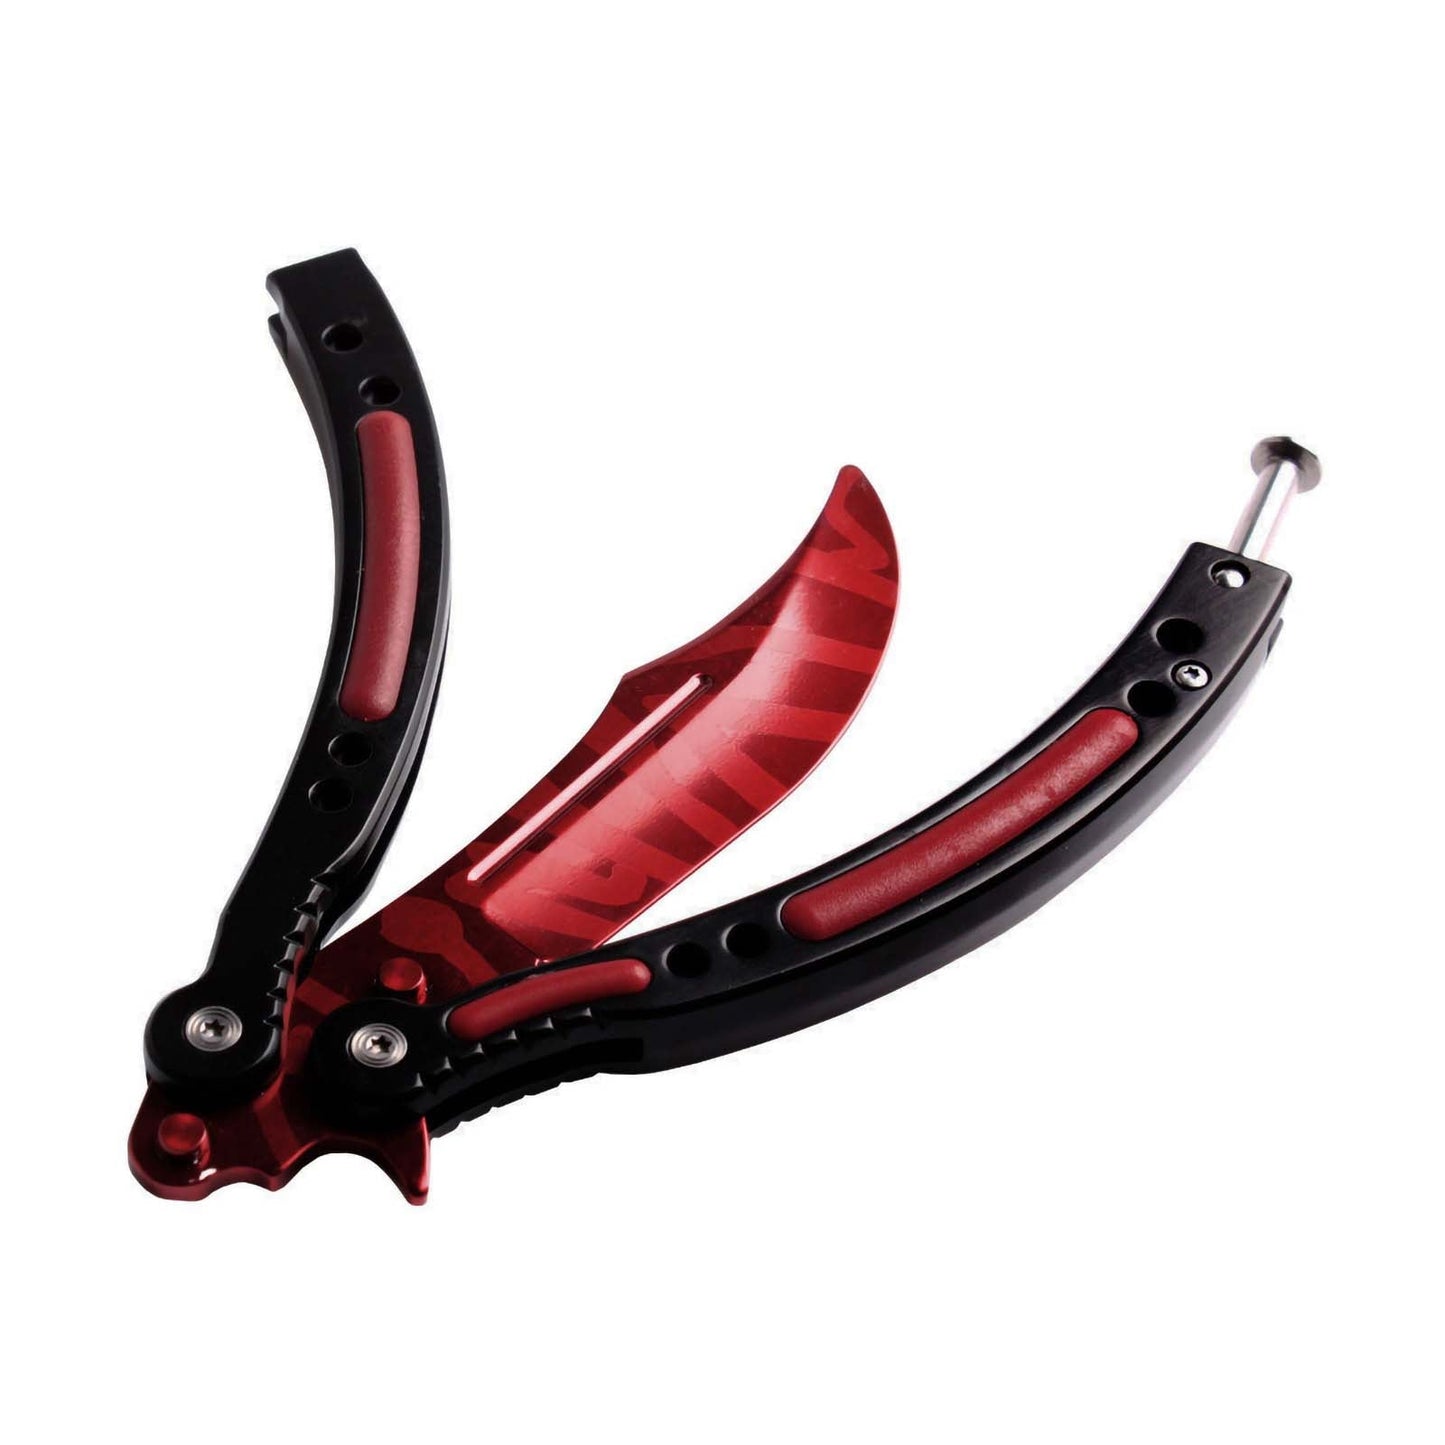 Andux Balisong Practice Trainer Curved Blade CS/HDD13 (Red) (Not Available in the UK)